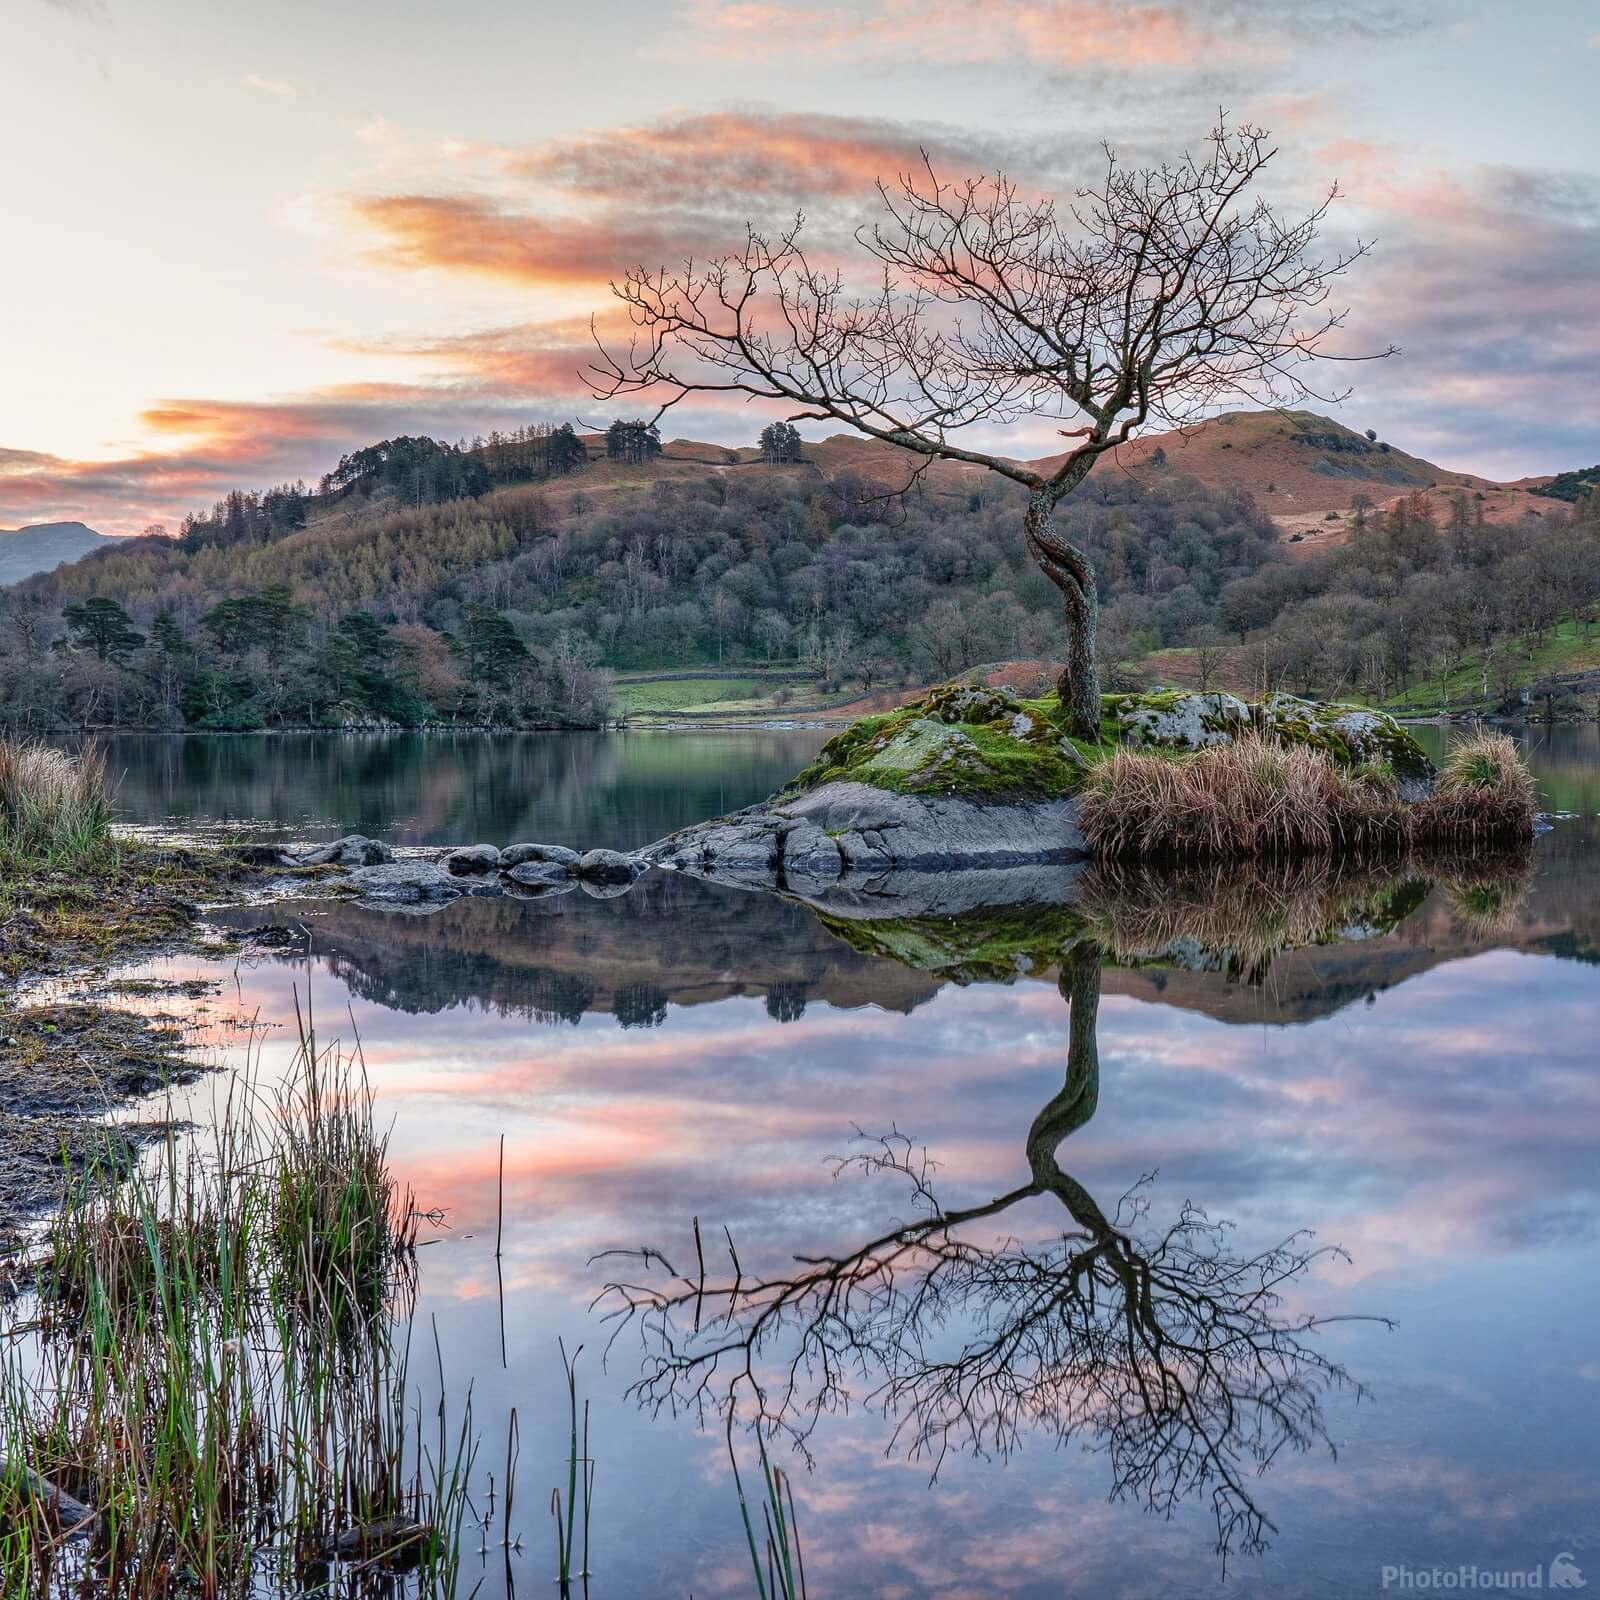 Image of Rydal Water, Lake District by Oliver Sherratt